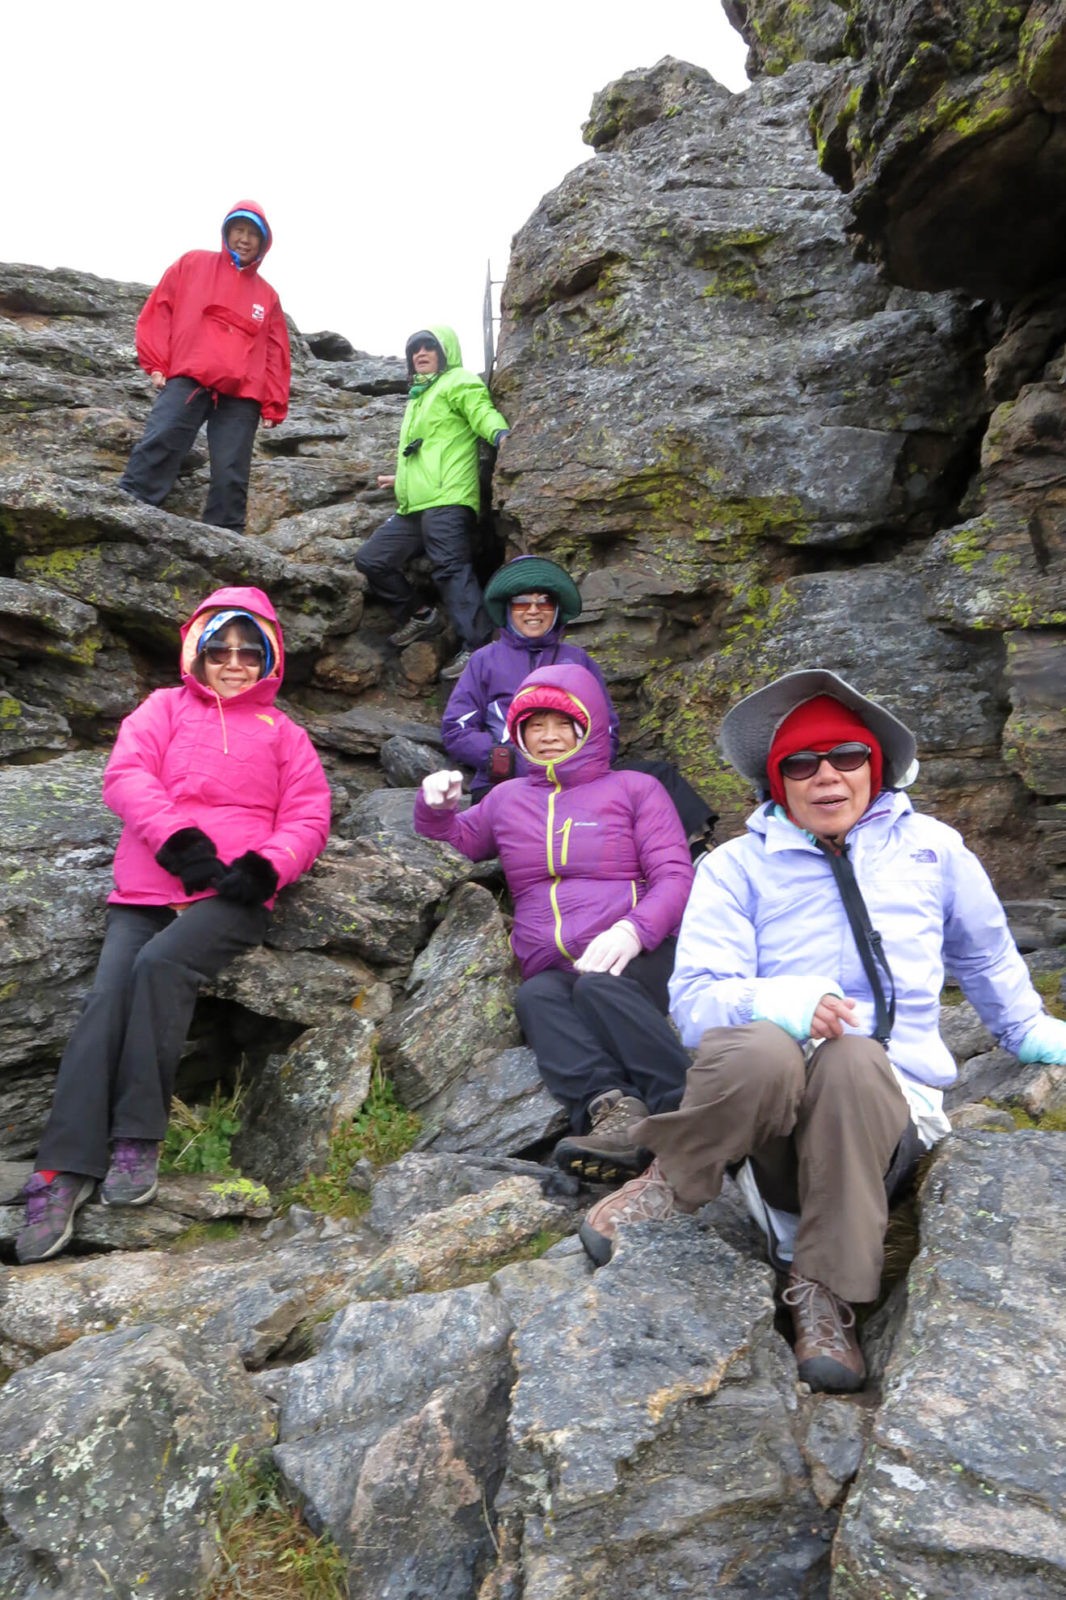 Robin Botie of Ithaca, New York, finds six women on the Tundra Communities Trail in the Rocky Mountains.